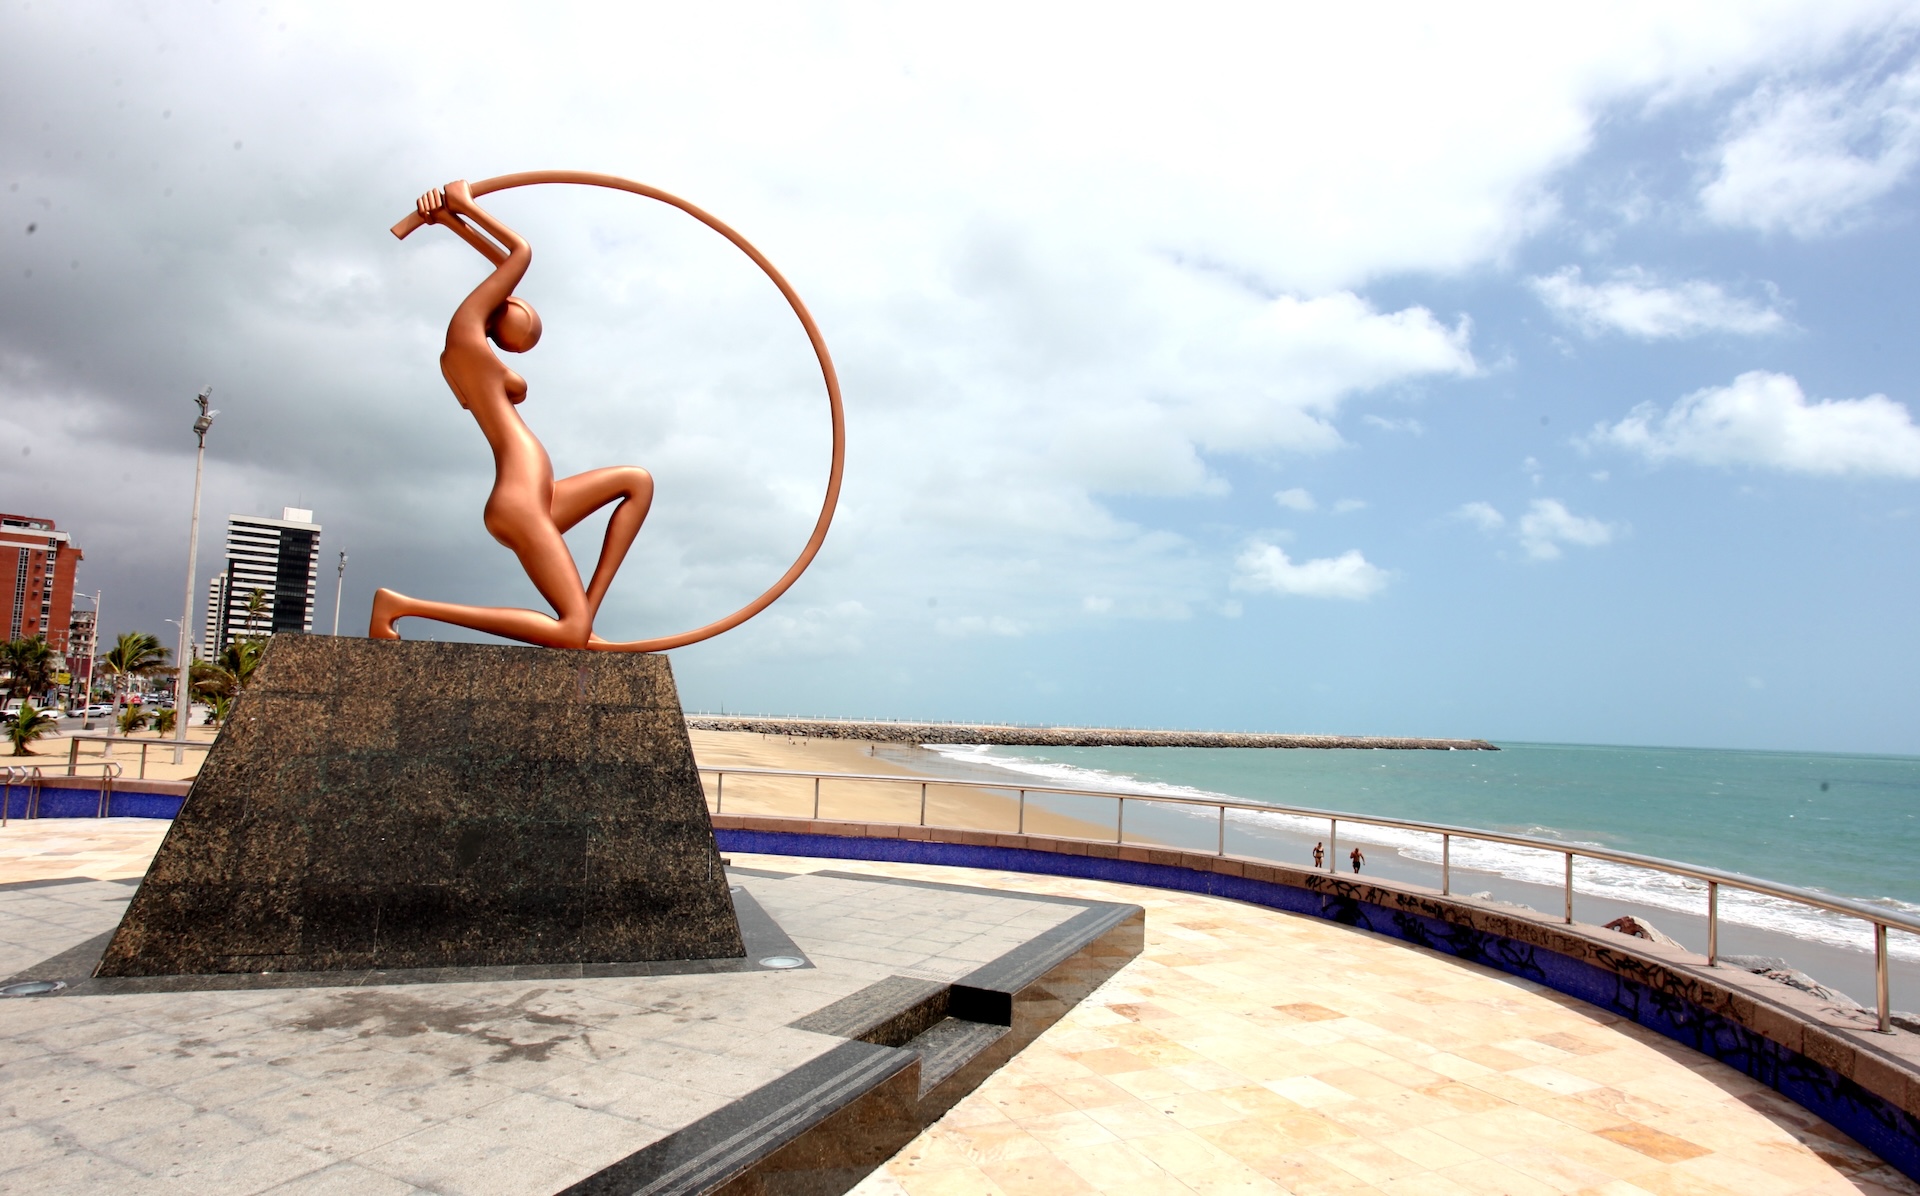 The Statue of Iracema Guardiã is a creation by Ceará artist Zenon da Cunha Mendes Barreto, in homage to the literature of José de Alencar, also from Ceará. The statue, inaugurated in 1995, is located on Iracema Beach. (Photo: Disclosure/SetFor)